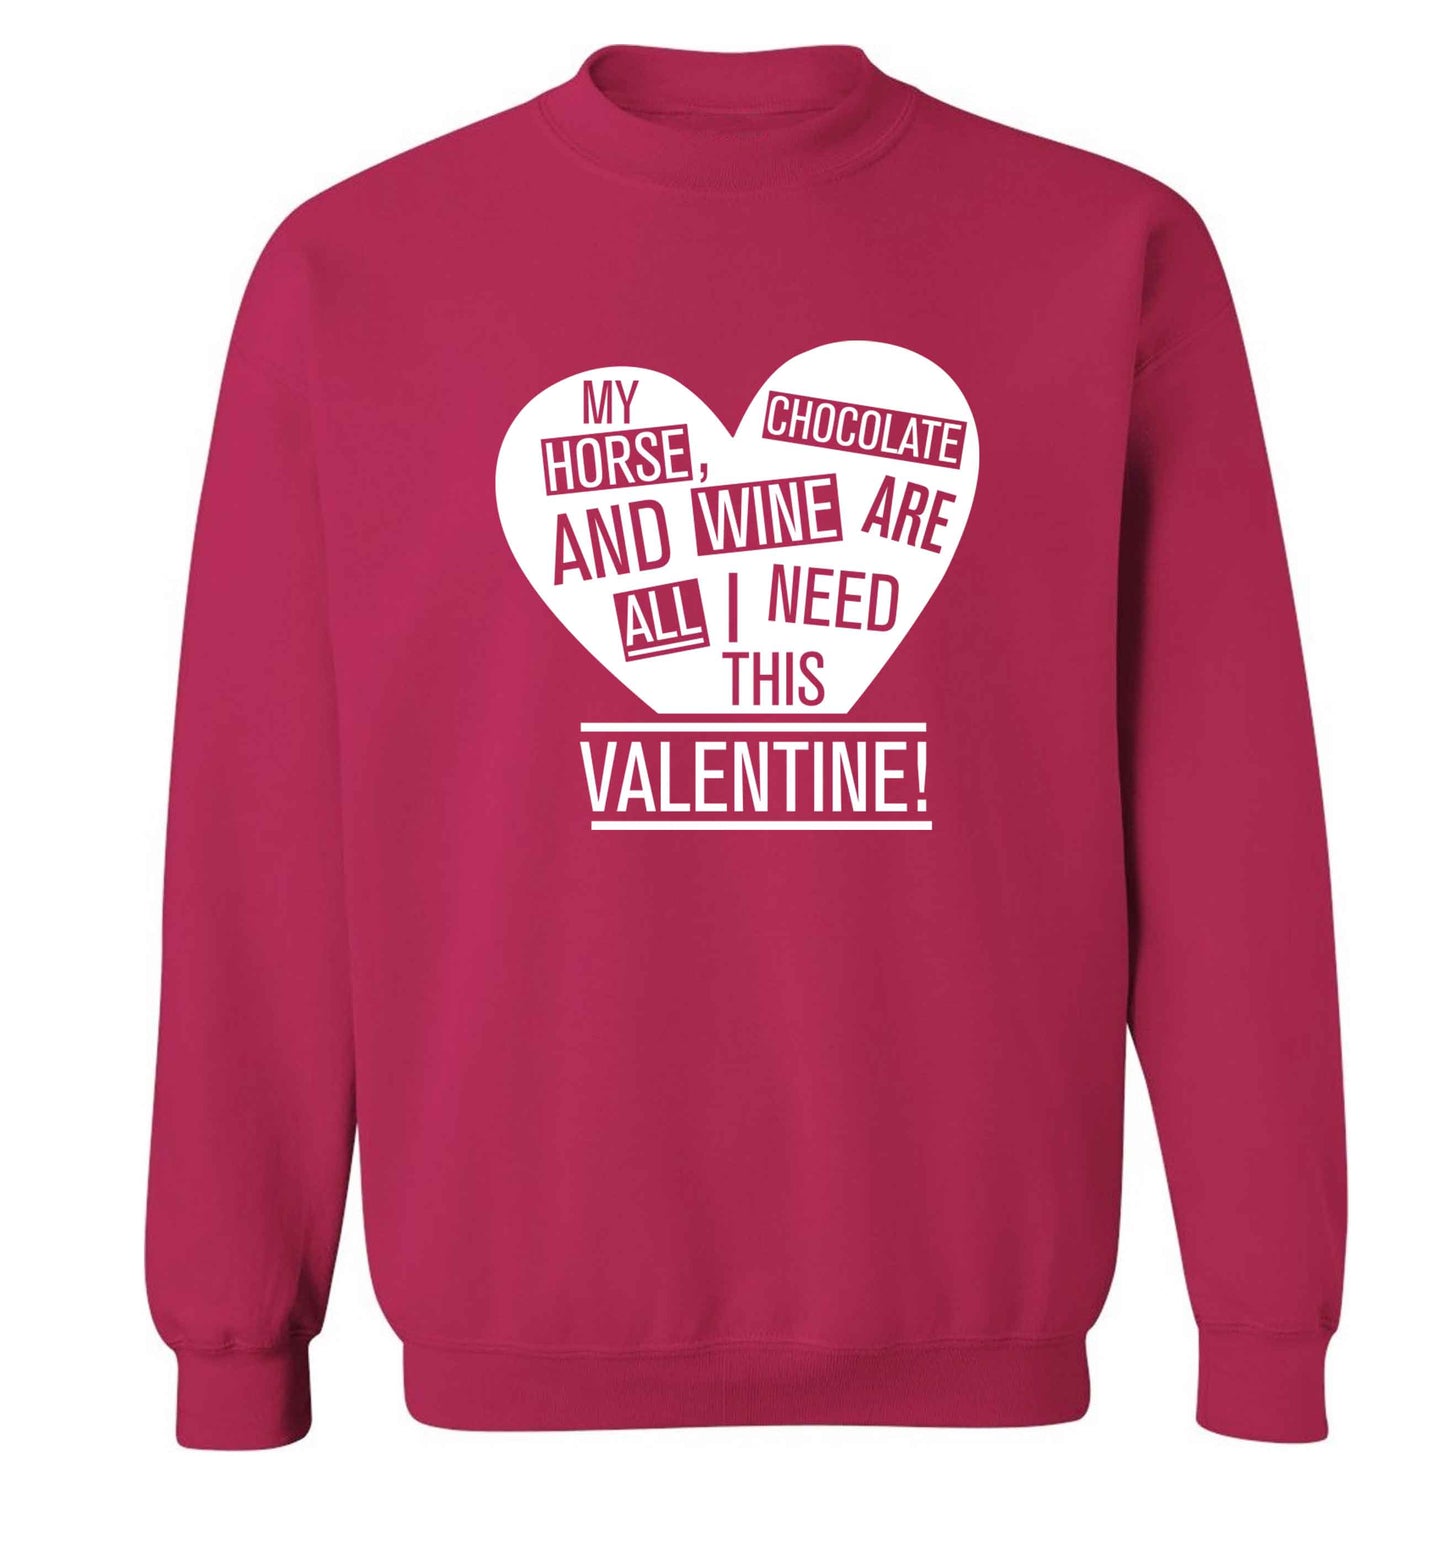 My horse chocolate and wine are all I need this valentine adult's unisex pink sweater 2XL